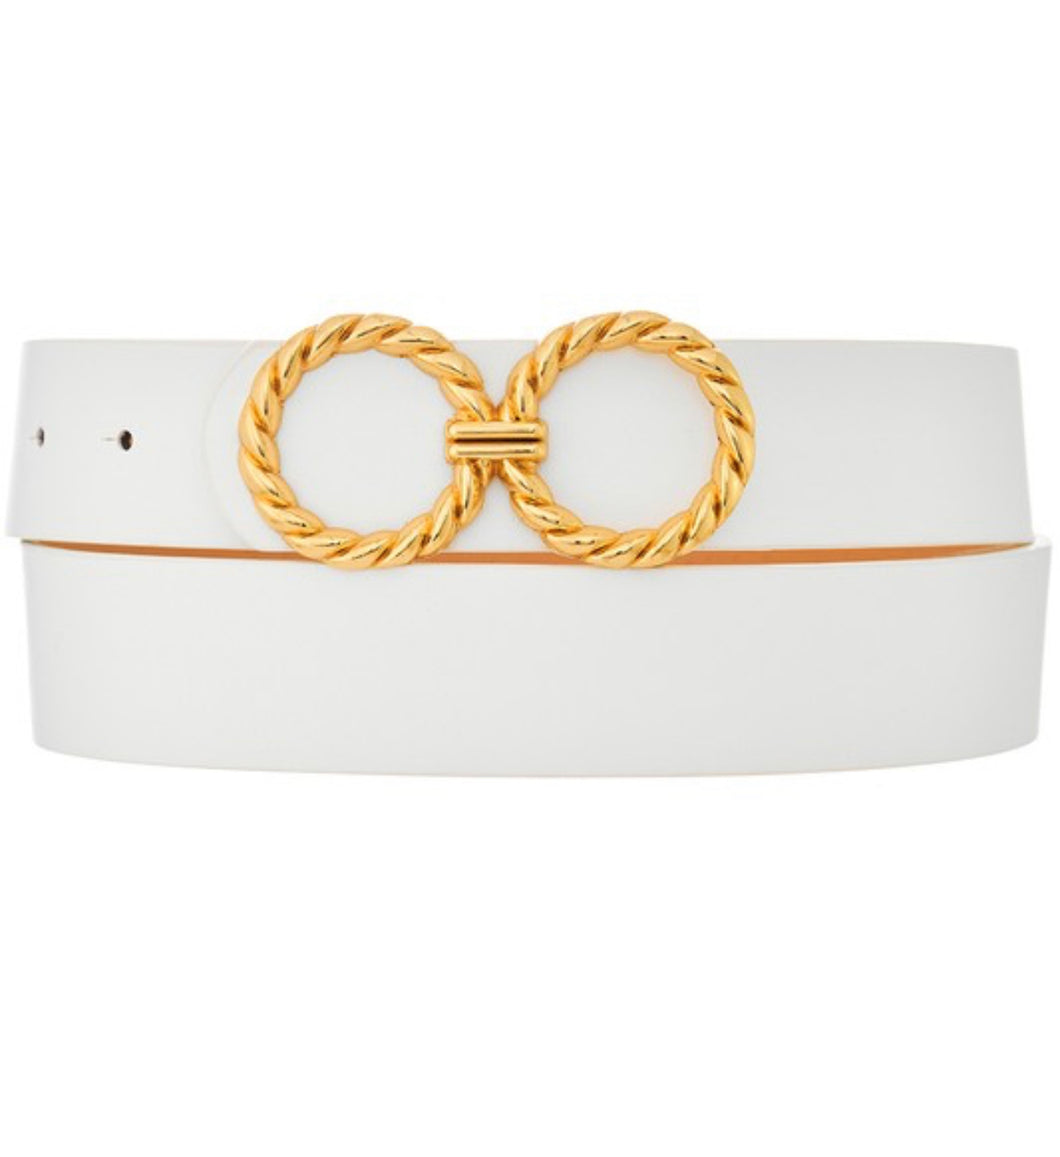 Roped Gold Circle Buckle Belt- White